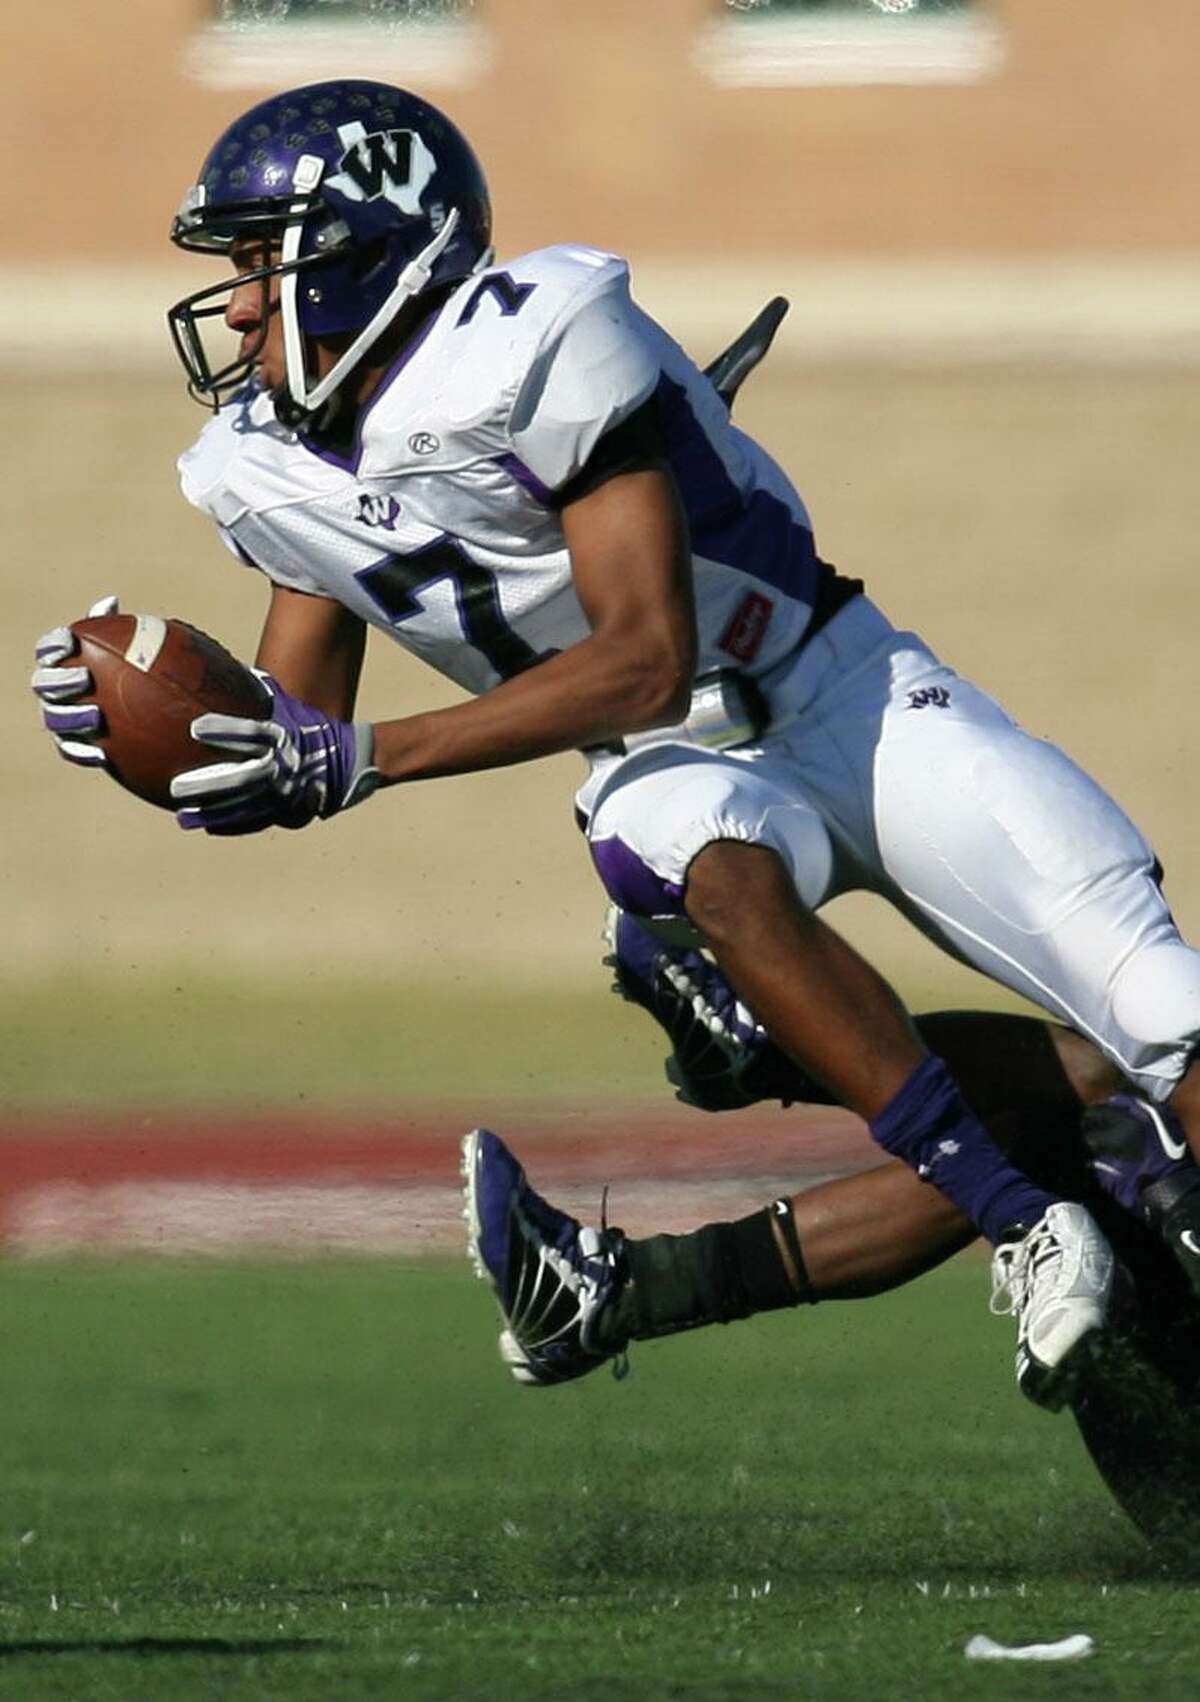 Willis wide receiver Quan West leaps for a first down during Saturday's game against Humble at Turner Stadium in Humble. To purchase this photo or others like it, visit: http://hcnonline.mycapture.com